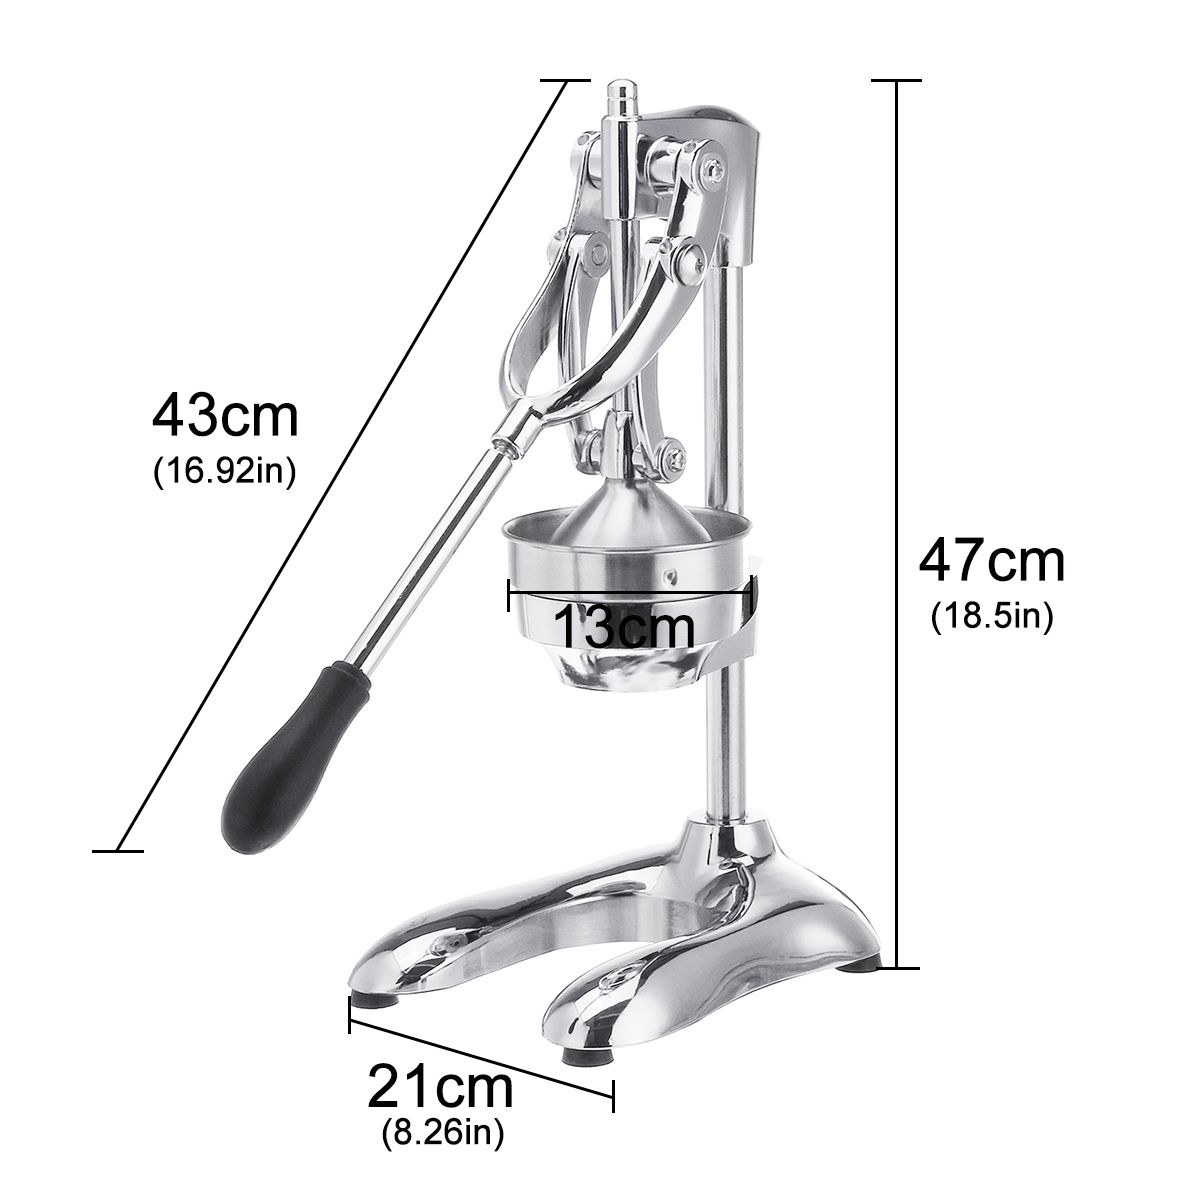 Stainless-Steel-Manual-Hand-Press-Juicer-Squeezer-Citrus-Pomegranate-Fruit-Juice-Extractor-Commercia-1536619